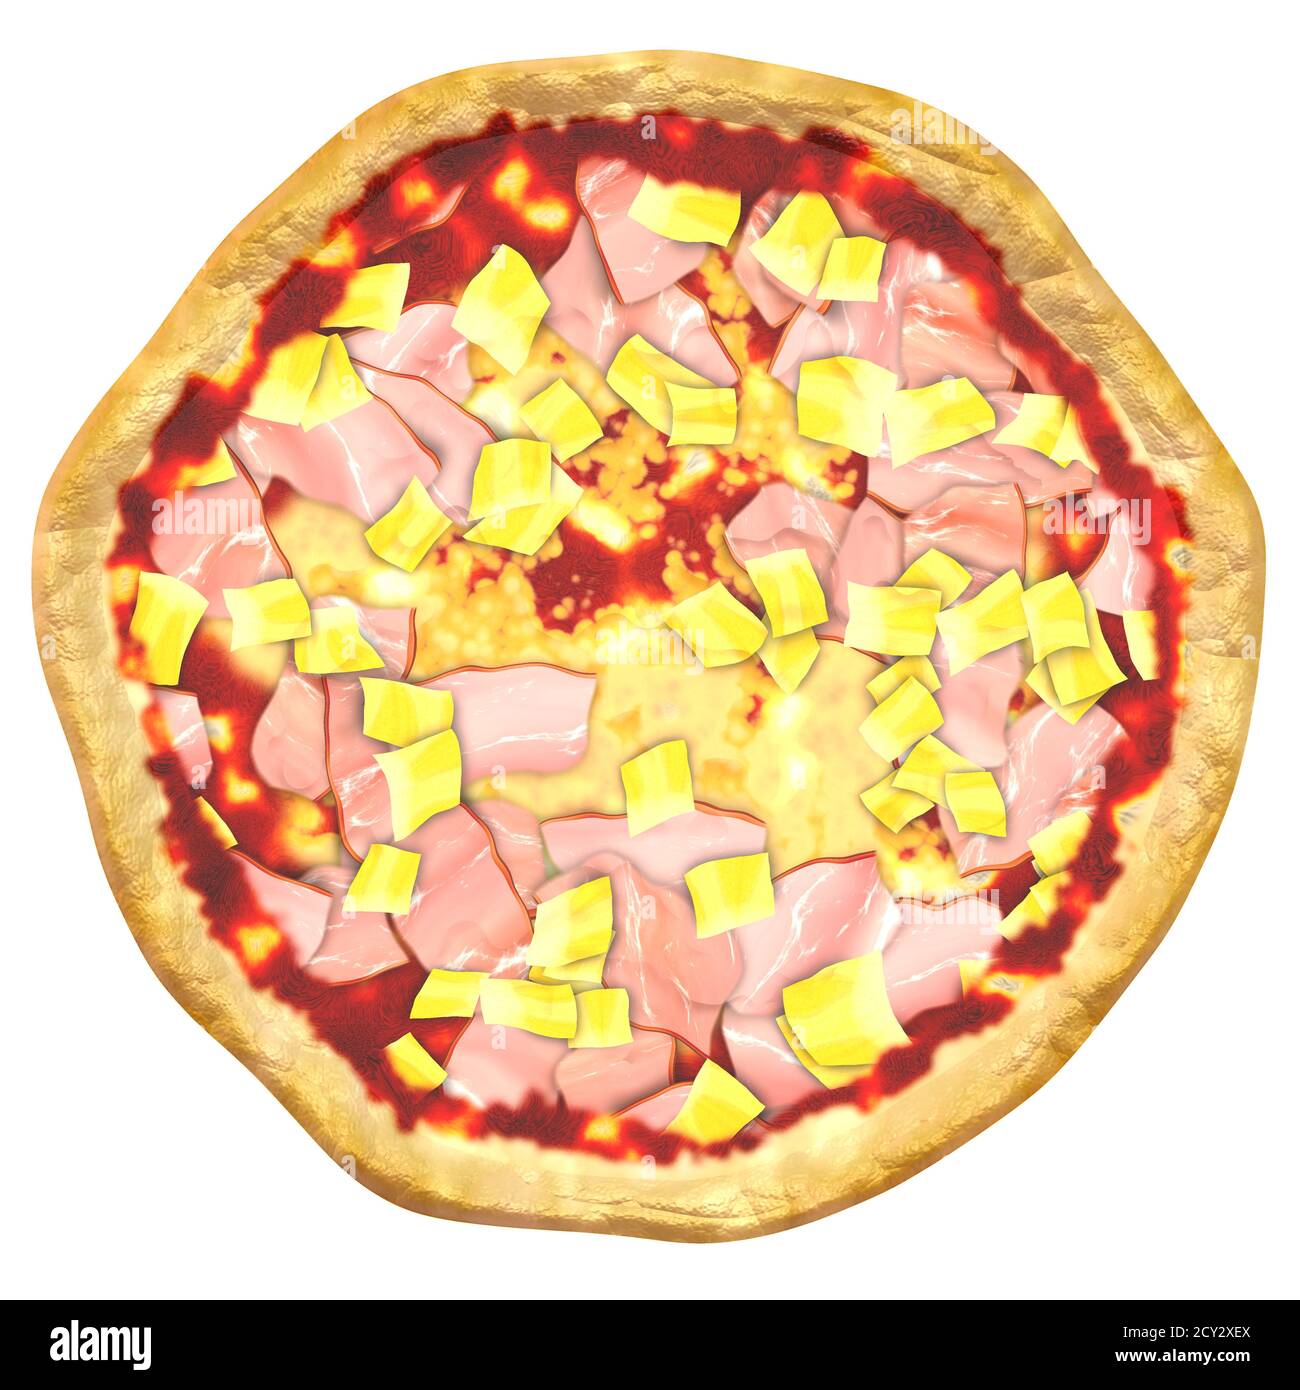 Appetizing 3-D Illustration of baked Hawaii pizza with tomato sauce, shredded Mozzarella Cheese, cooked ham, pineapple chunks, sea salt, small bacon s Stock Photo